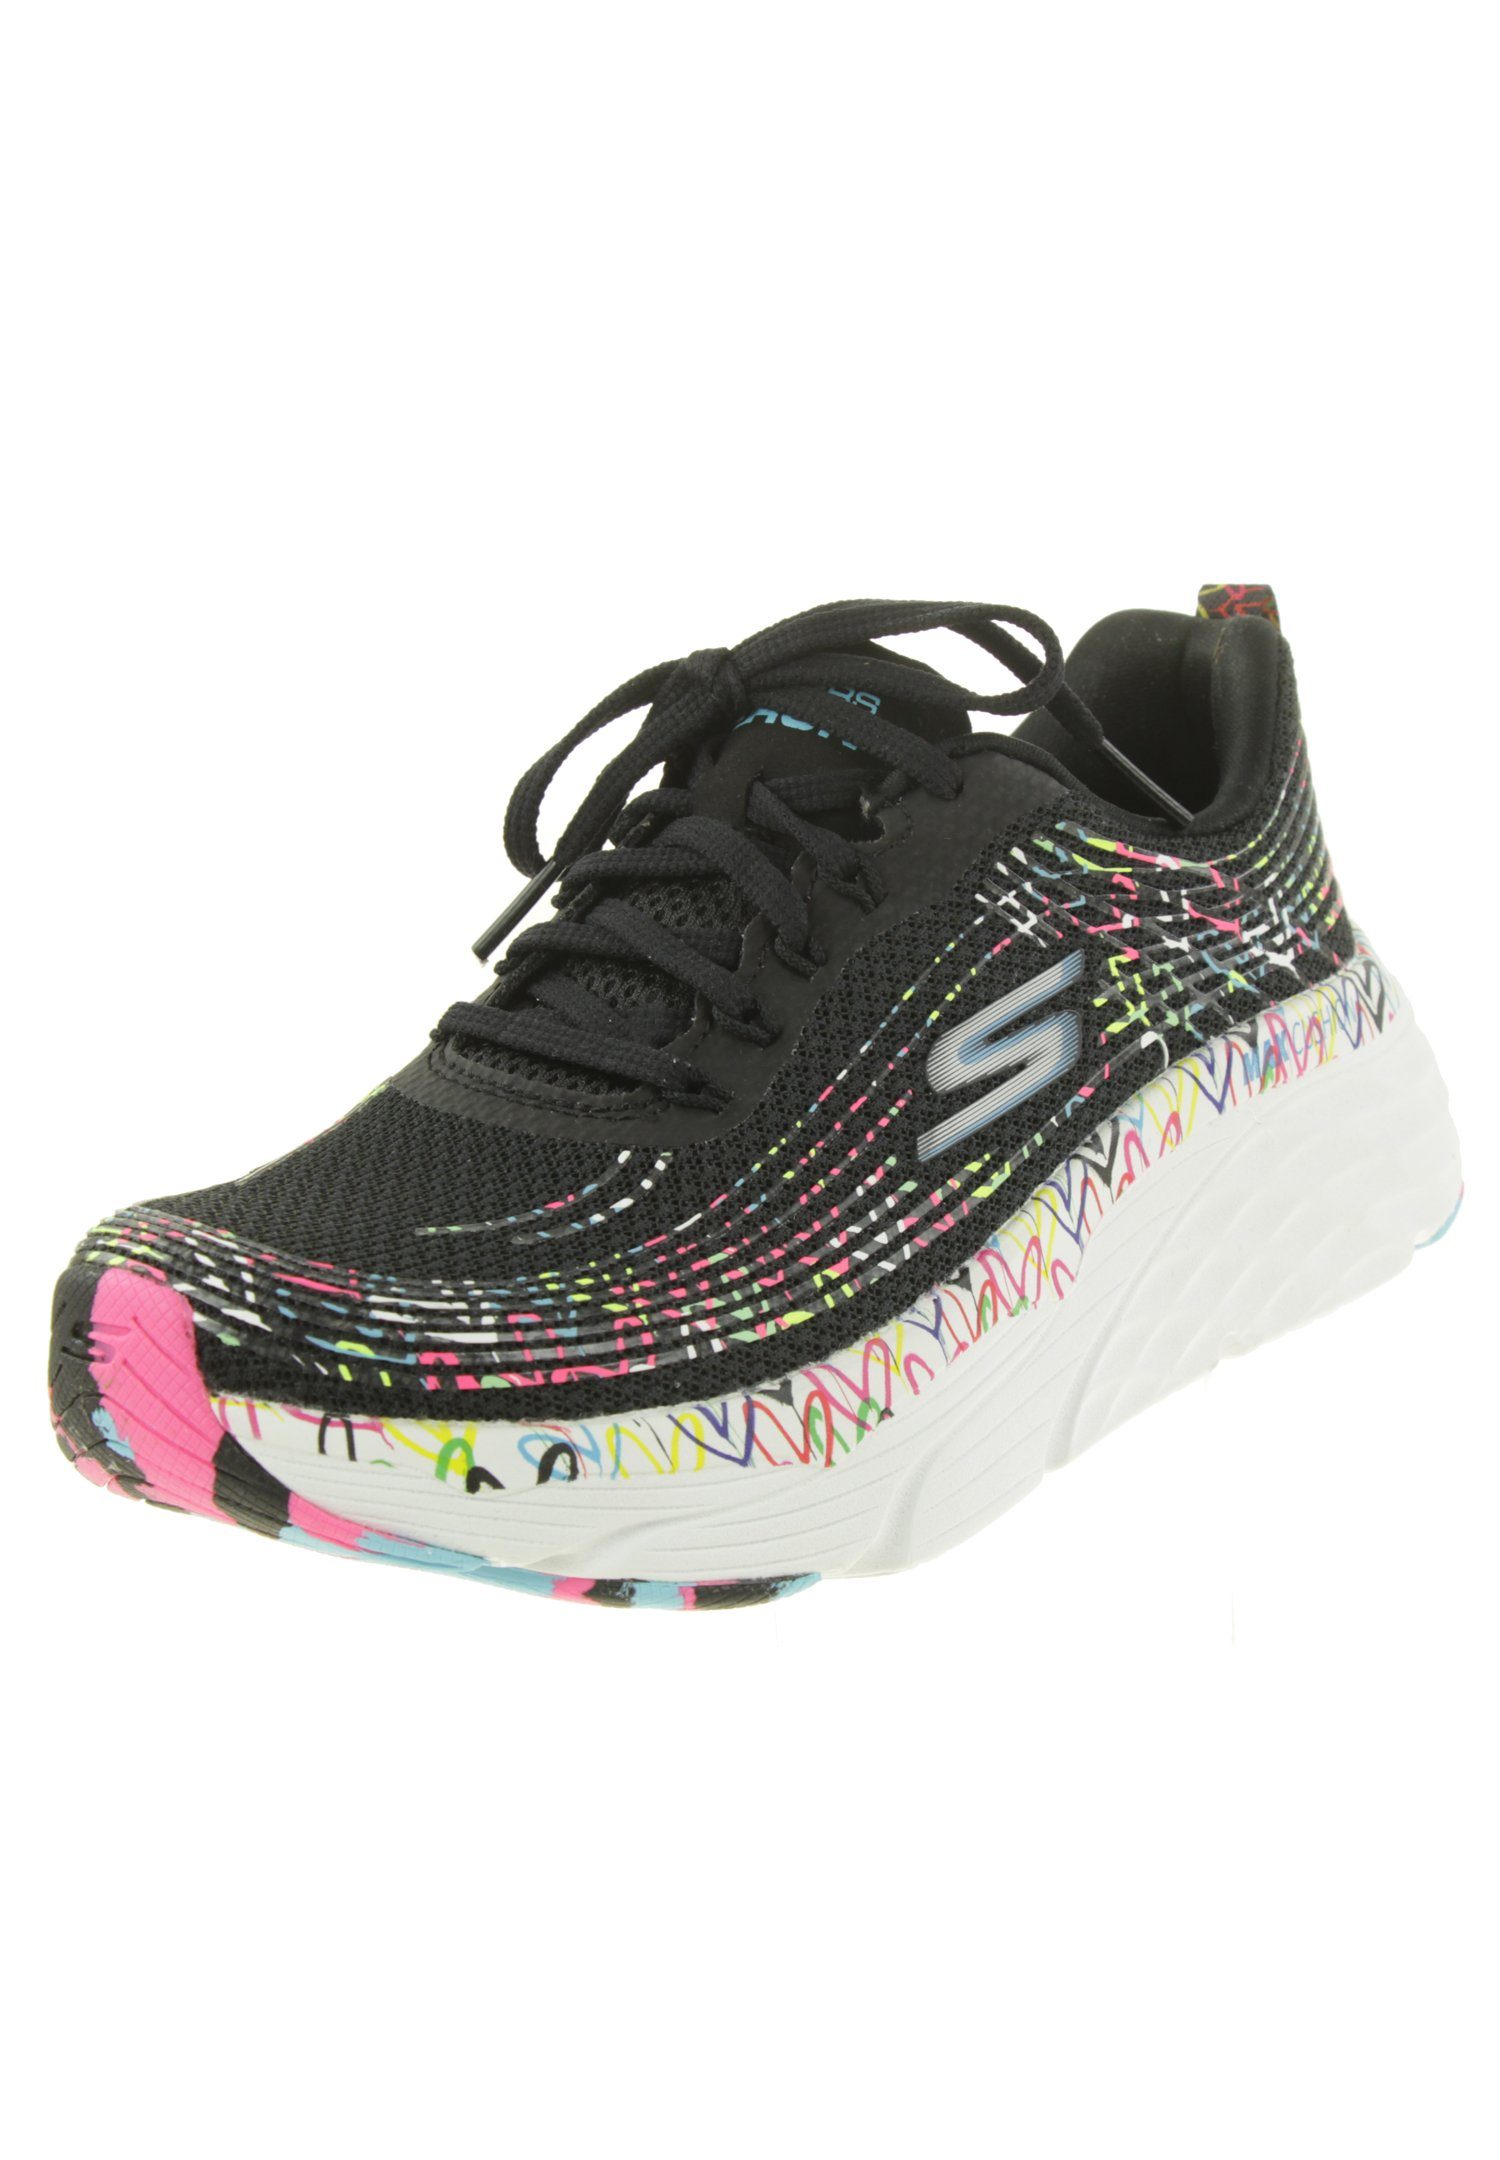 WITH PAINTED CUSHIONNING ELITE Sneaker LOVE MAX Skechers